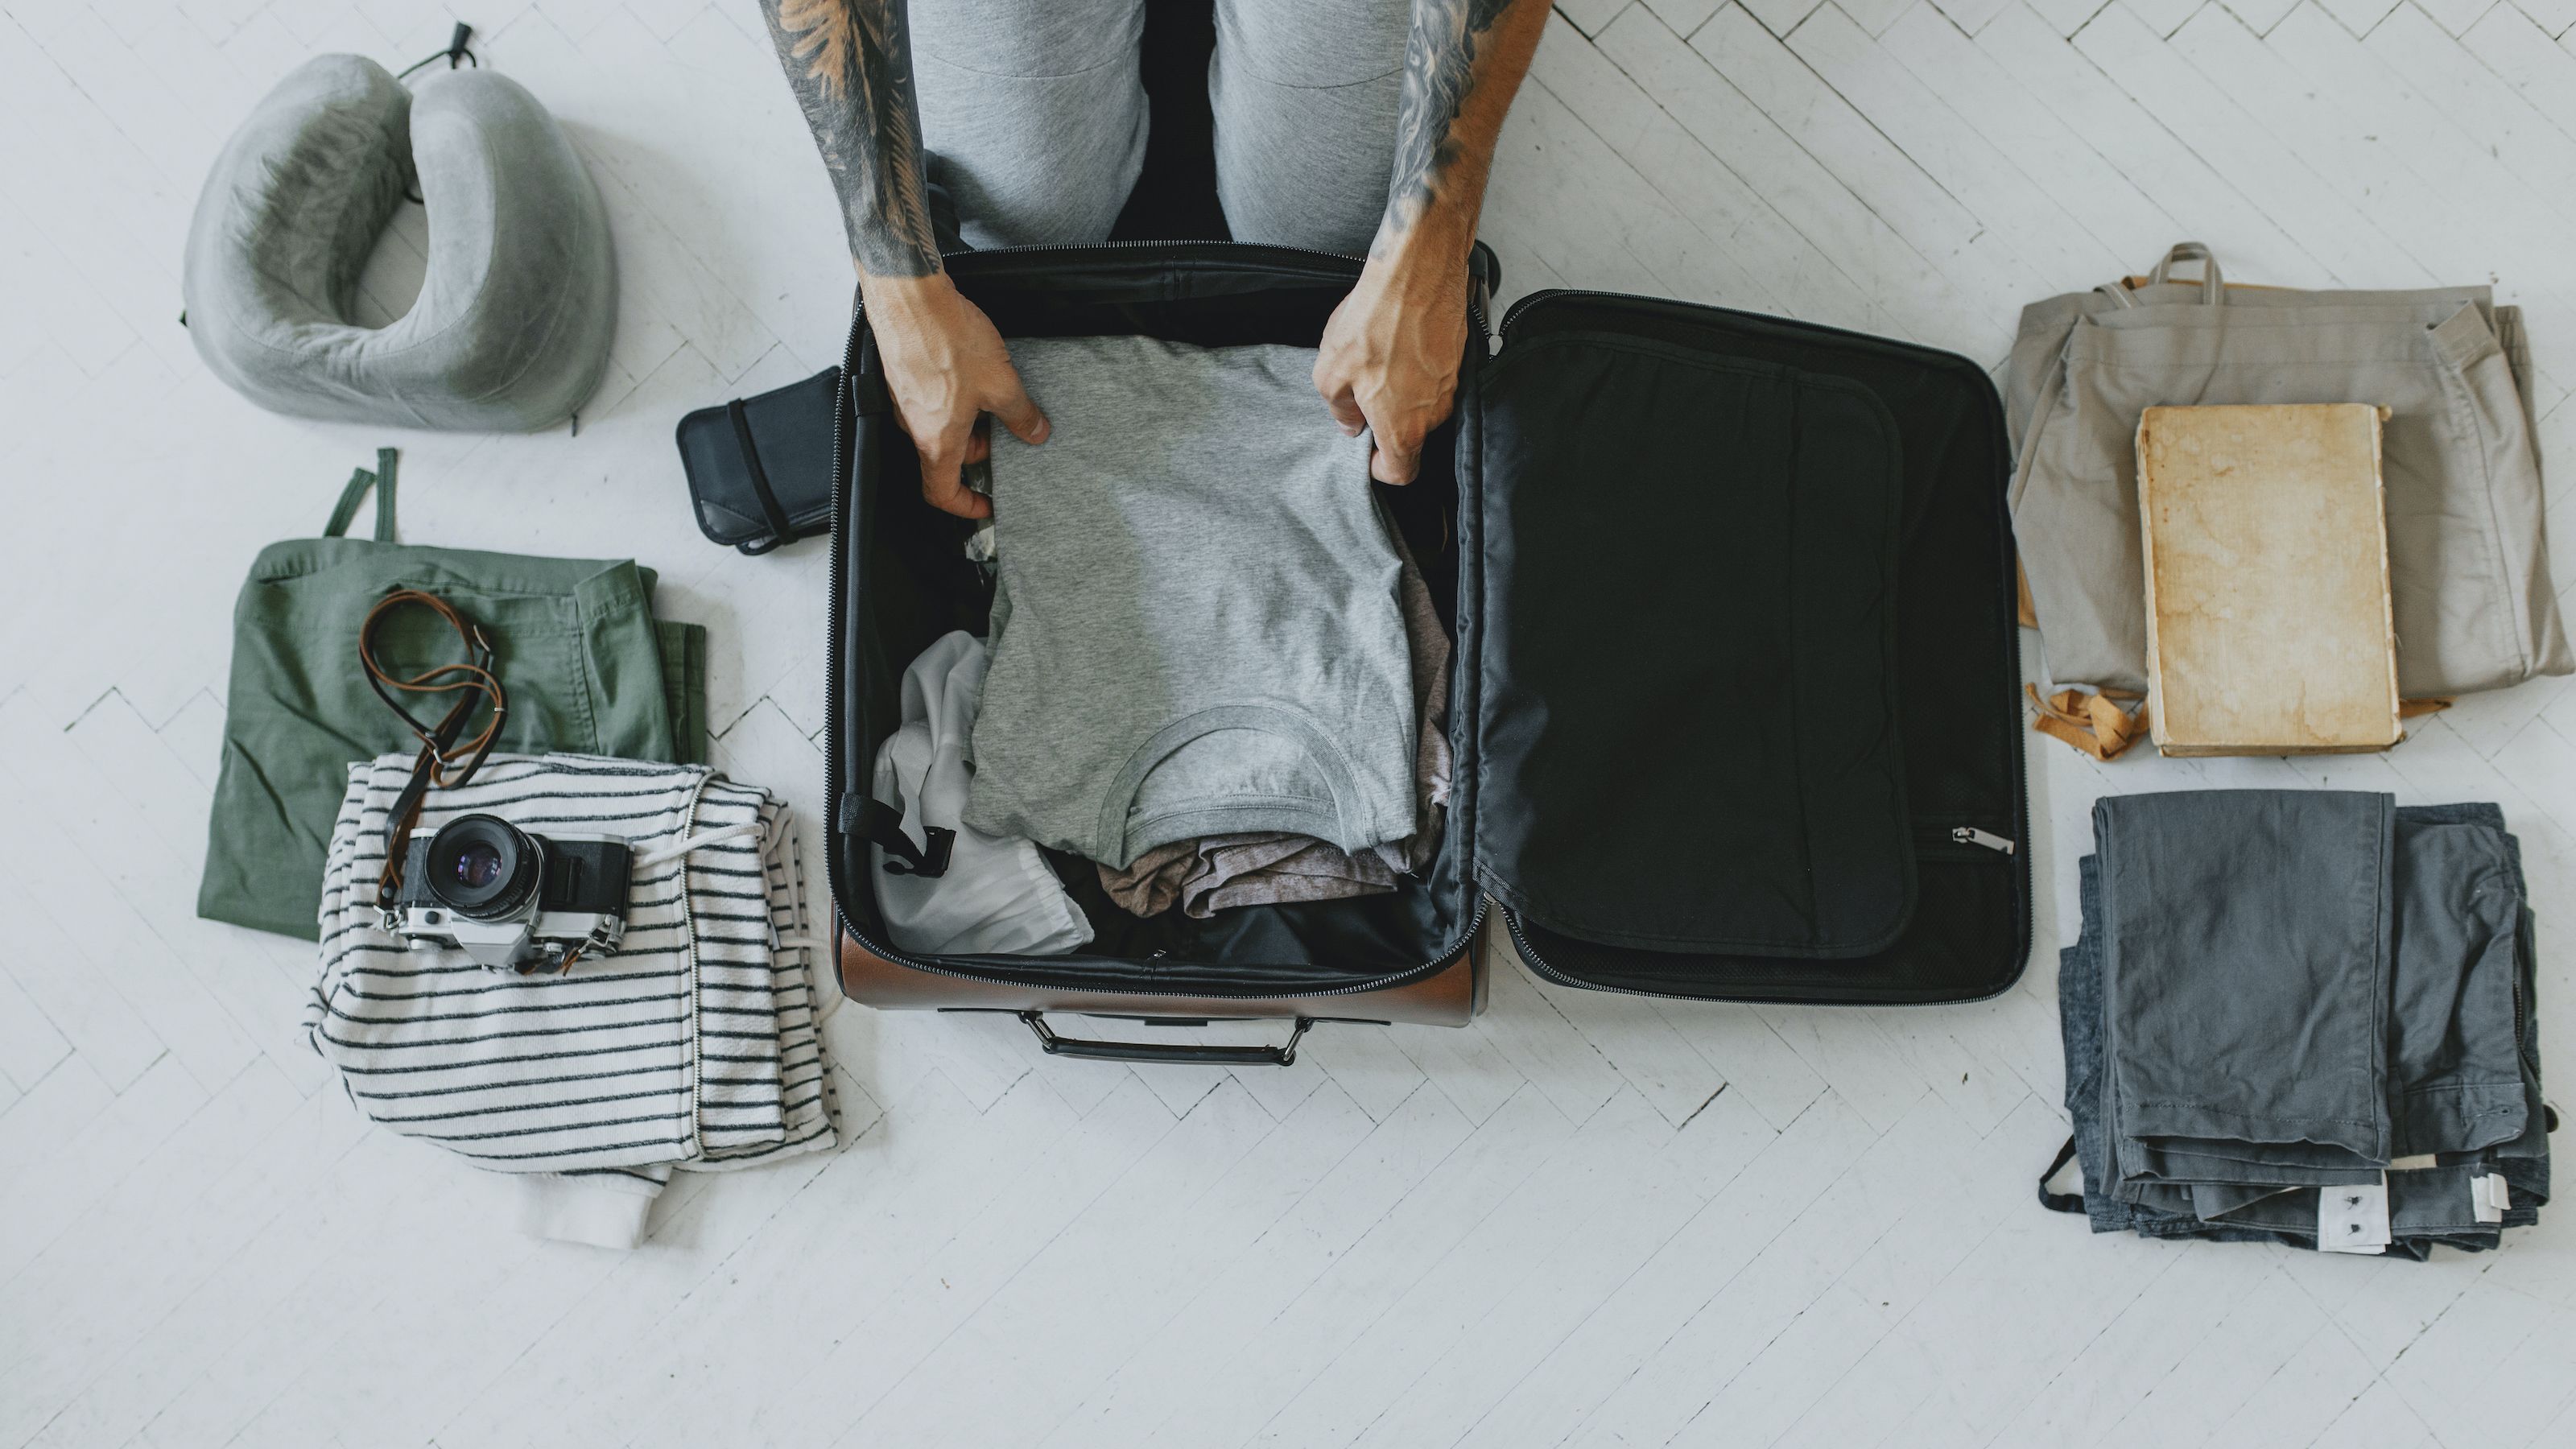 Carry-On Luggage Size Guide: How Big Can Your Carry-On Be? - AFAR